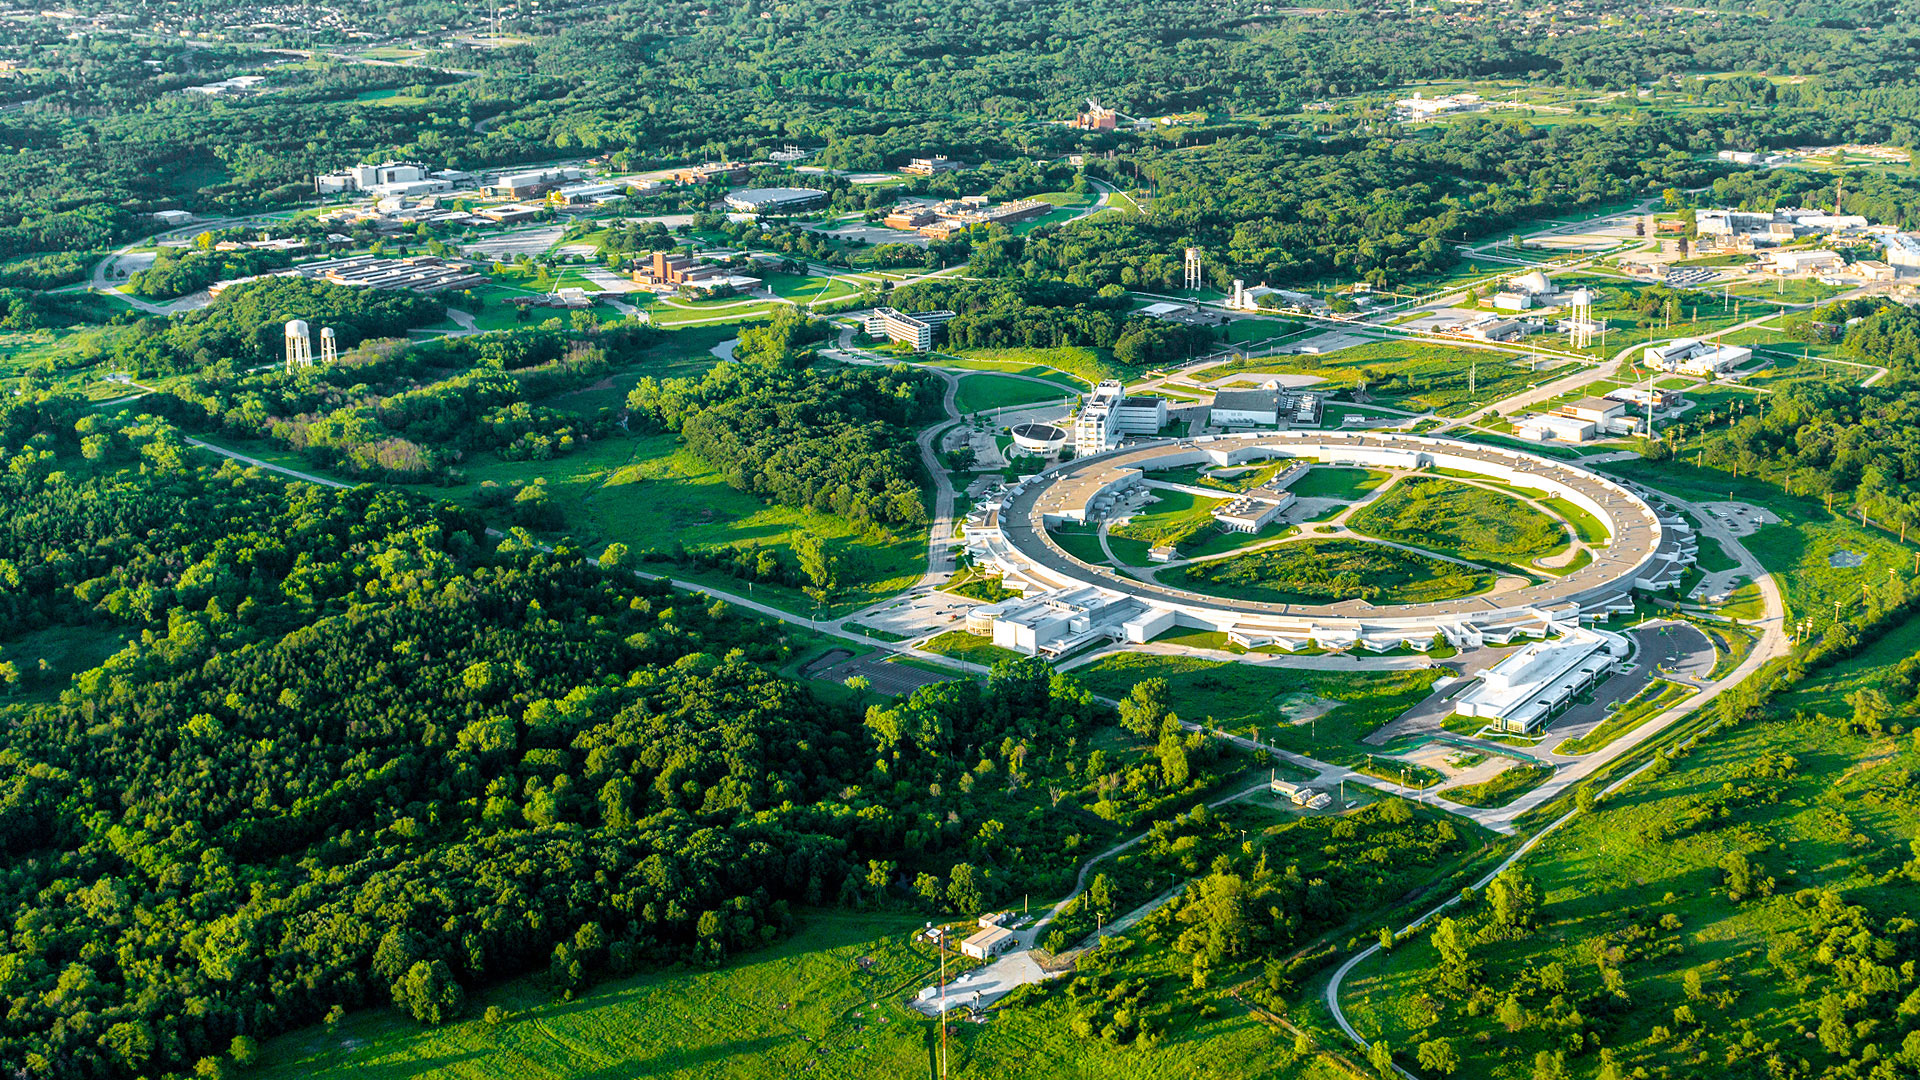 Aerial view of Argonne and CNM surrounded by green landscape.